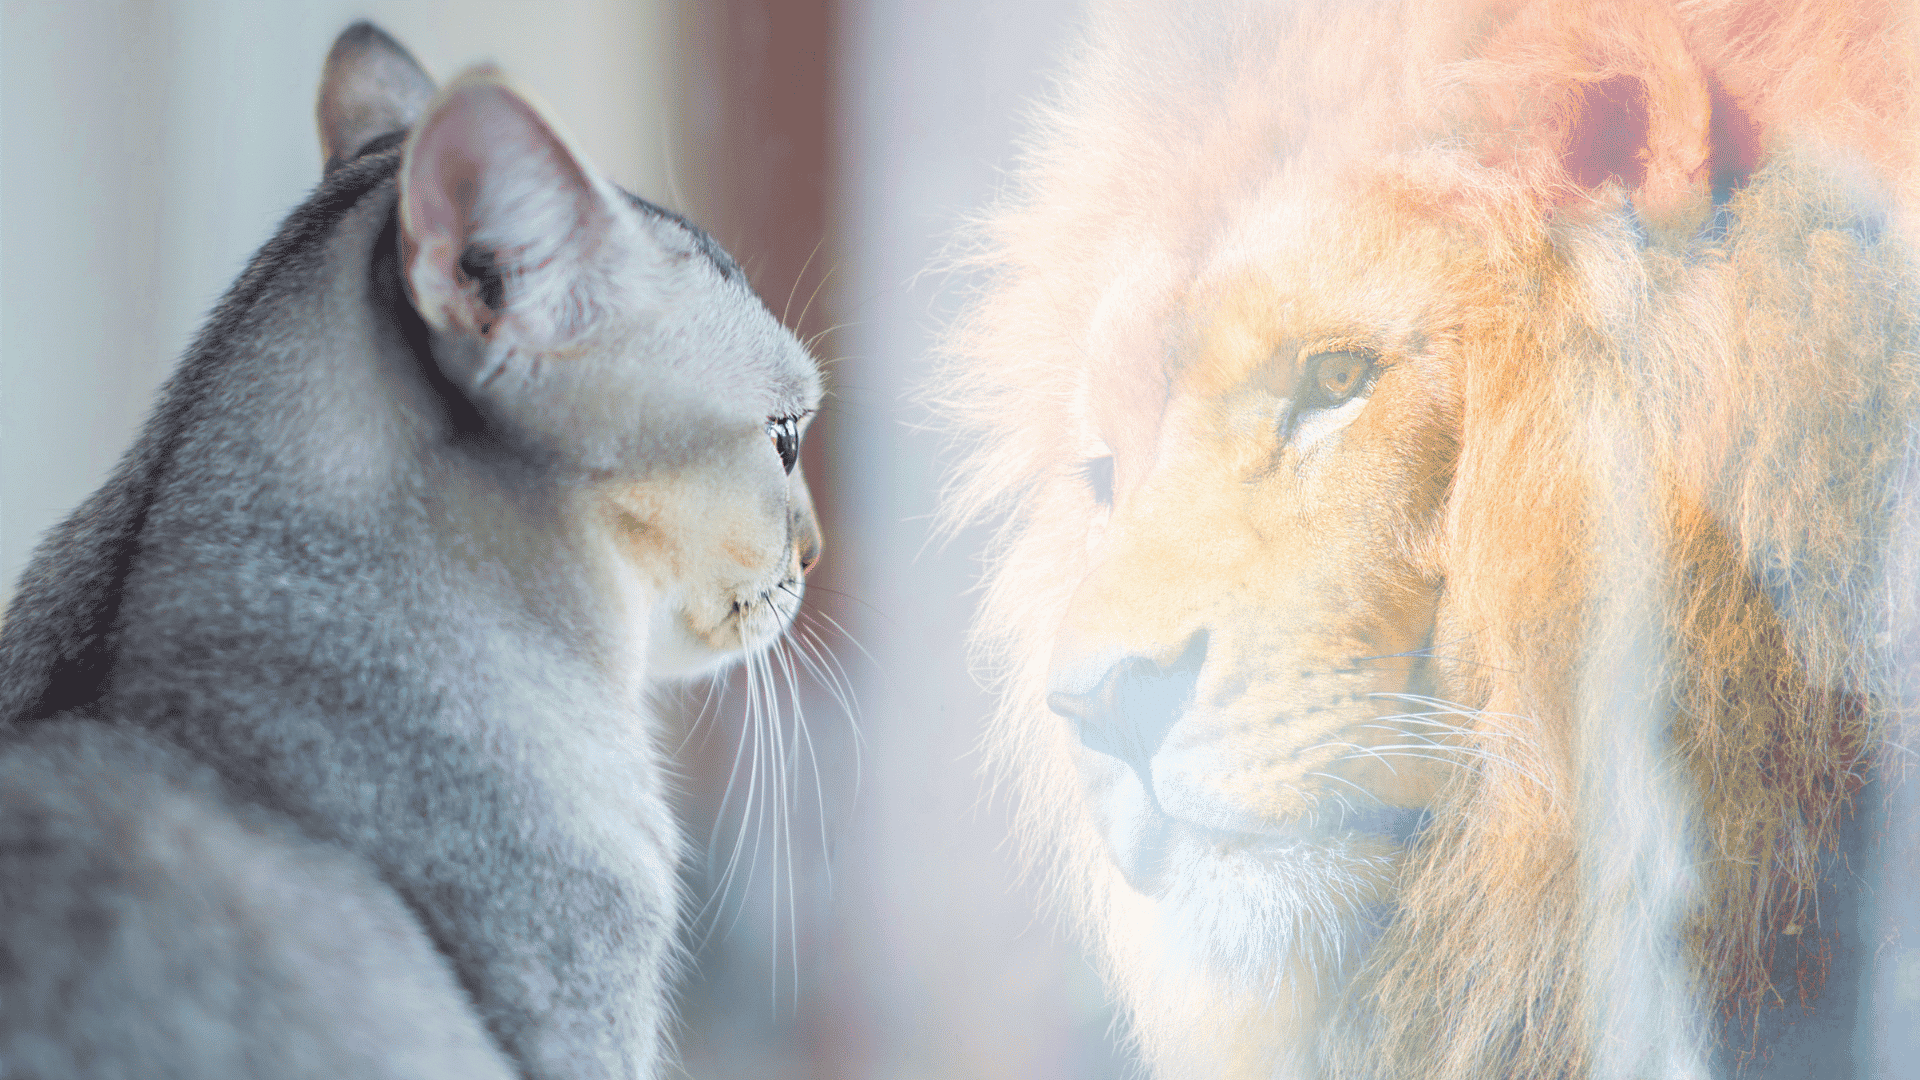 A cat sees it's own reflection as a lion